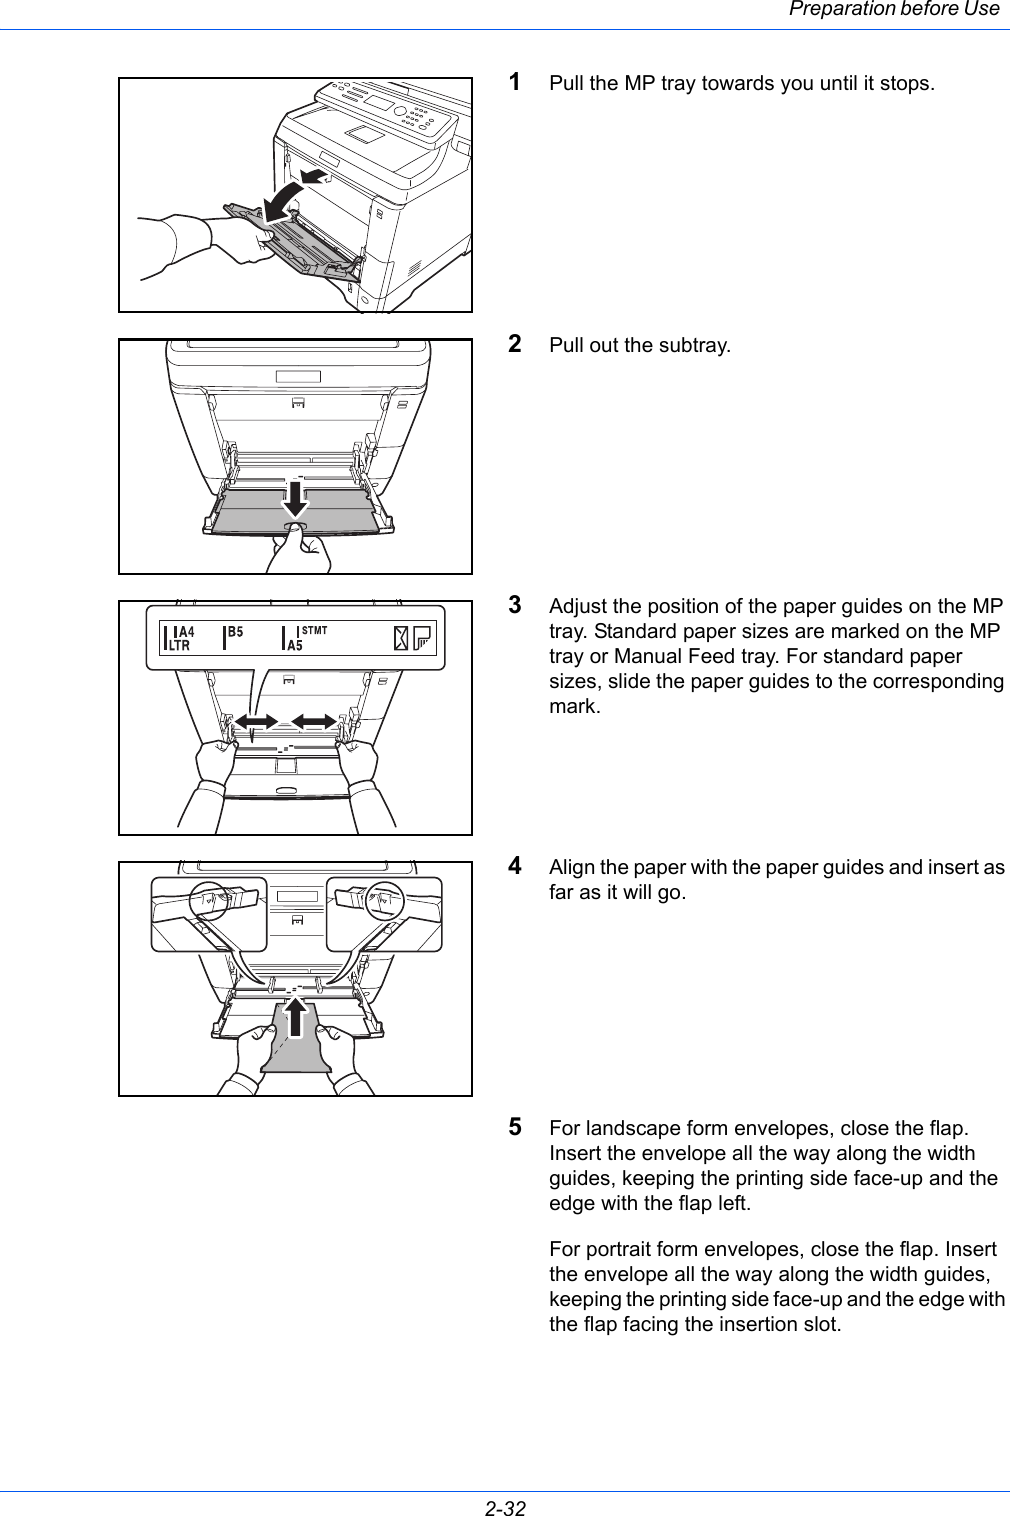 Preparation before Use 2-321Pull the MP tray towards you until it stops.2Pull out the subtray.3Adjust the position of the paper guides on the MP tray. Standard paper sizes are marked on the MP tray or Manual Feed tray. For standard paper sizes, slide the paper guides to the corresponding mark.4Align the paper with the paper guides and insert as far as it will go.5For landscape form envelopes, close the flap. Insert the envelope all the way along the width guides, keeping the printing side face-up and the edge with the flap left.For portrait form envelopes, close the flap. Insert the envelope all the way along the width guides, keeping the printing side face-up and the edge with the flap facing the insertion slot.